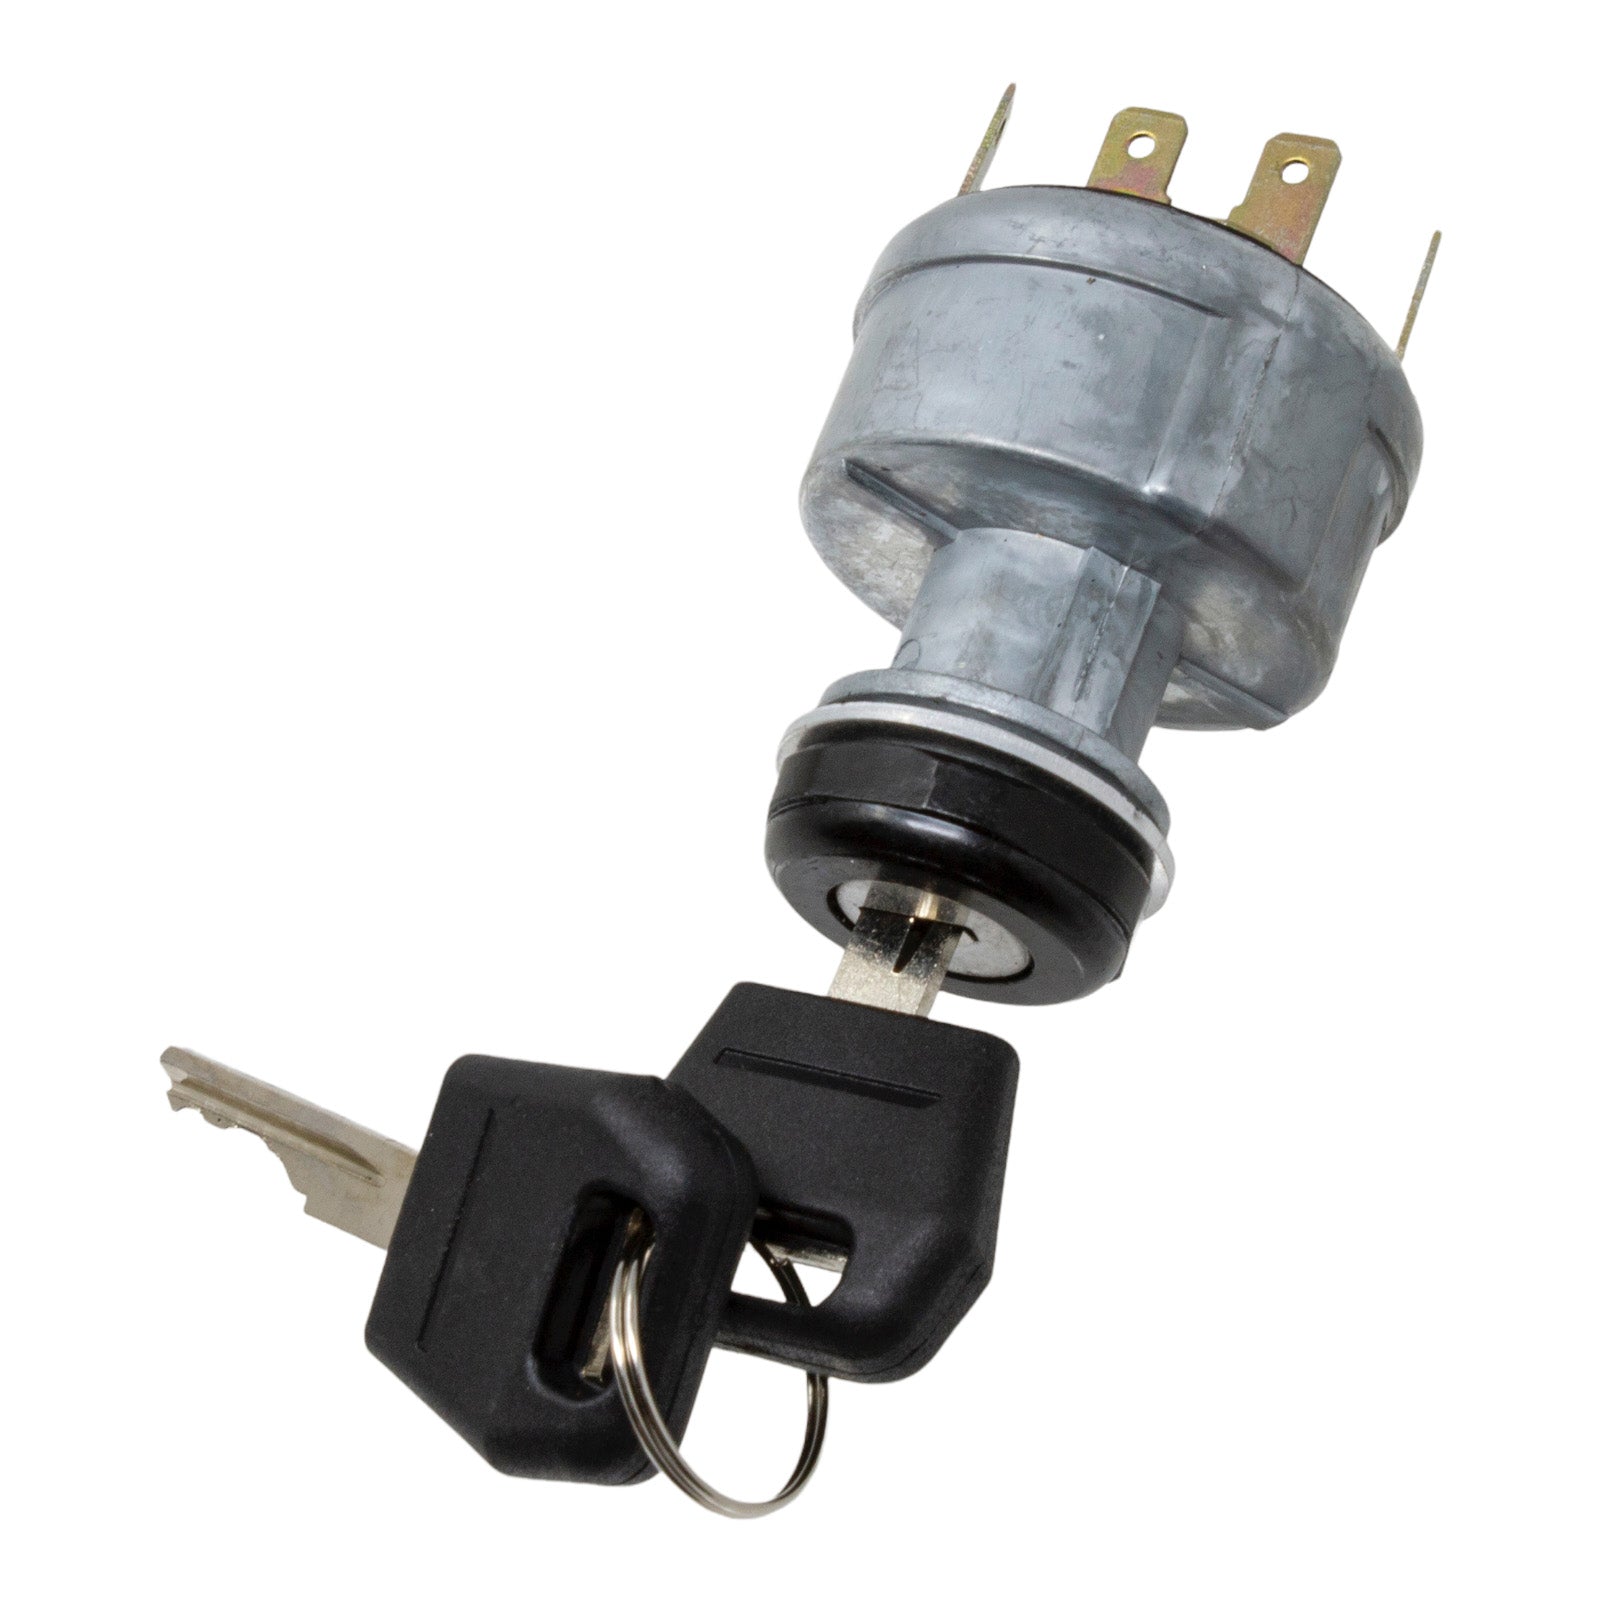 Duraforce 3688342M92, Ignition Switch For Case IH